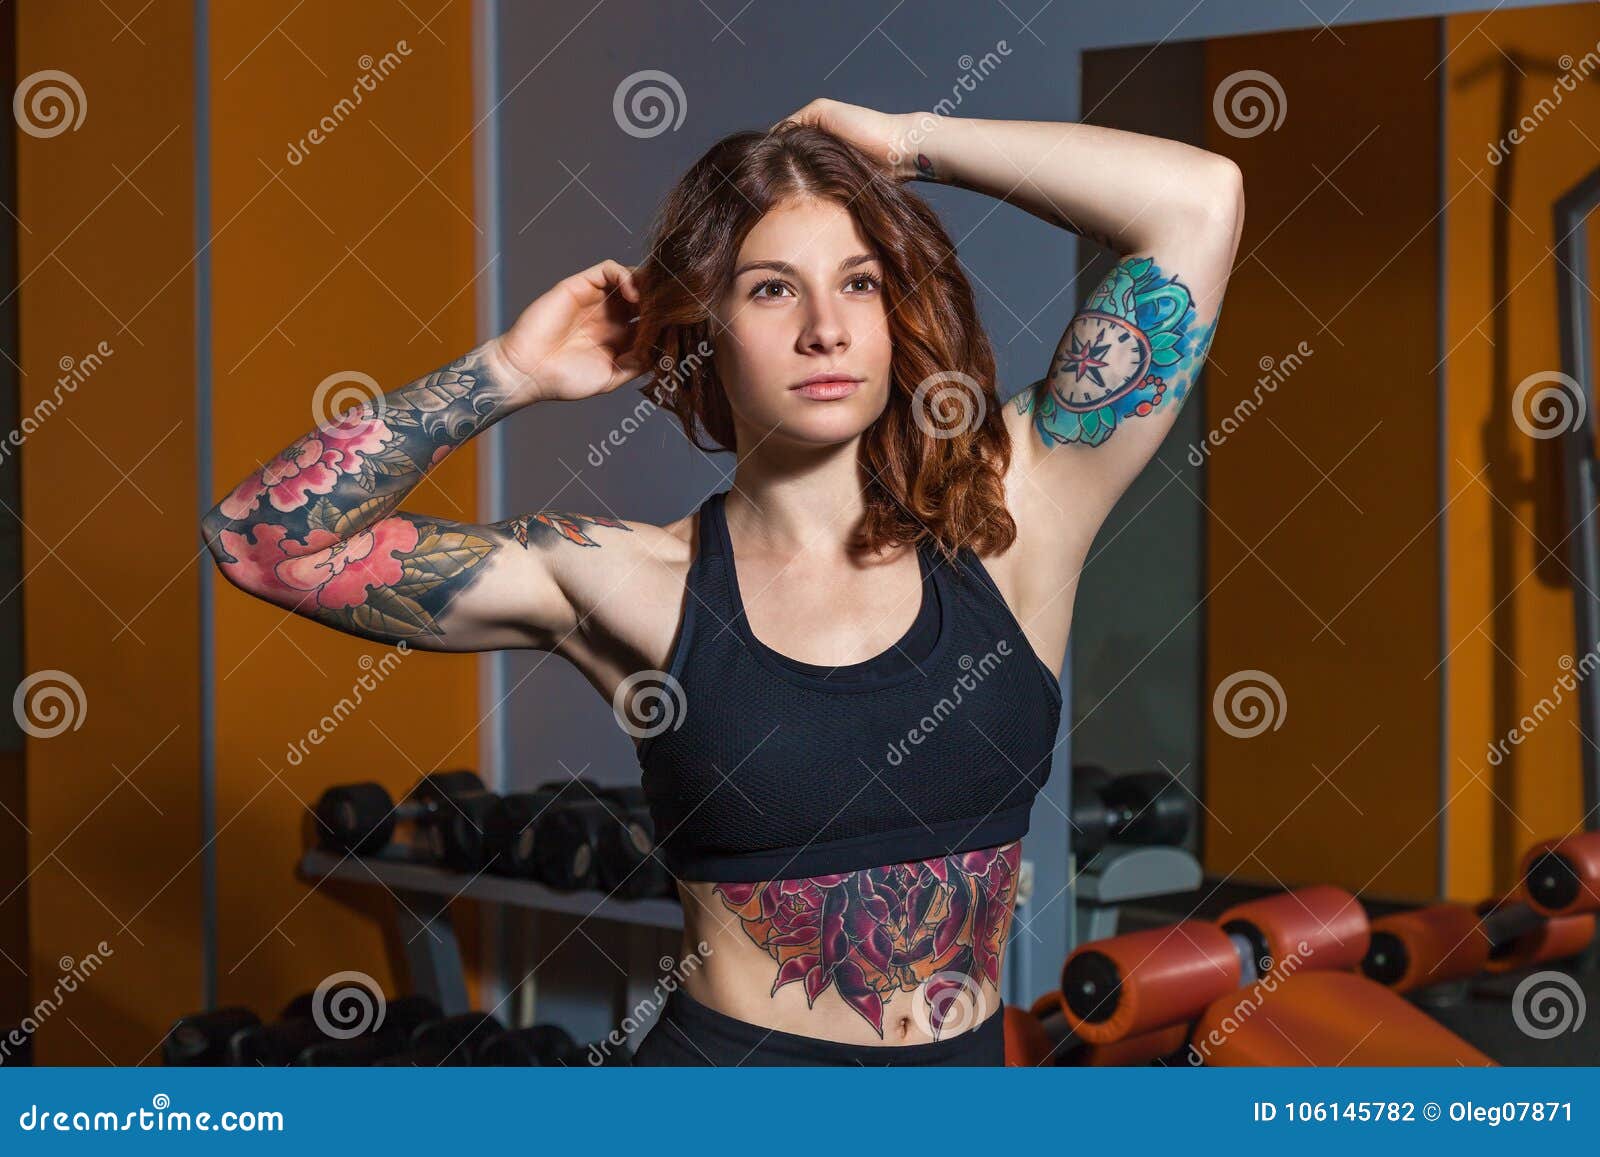 Premium Photo | A woman with tattoos on her back is shown with a large  window in the background.